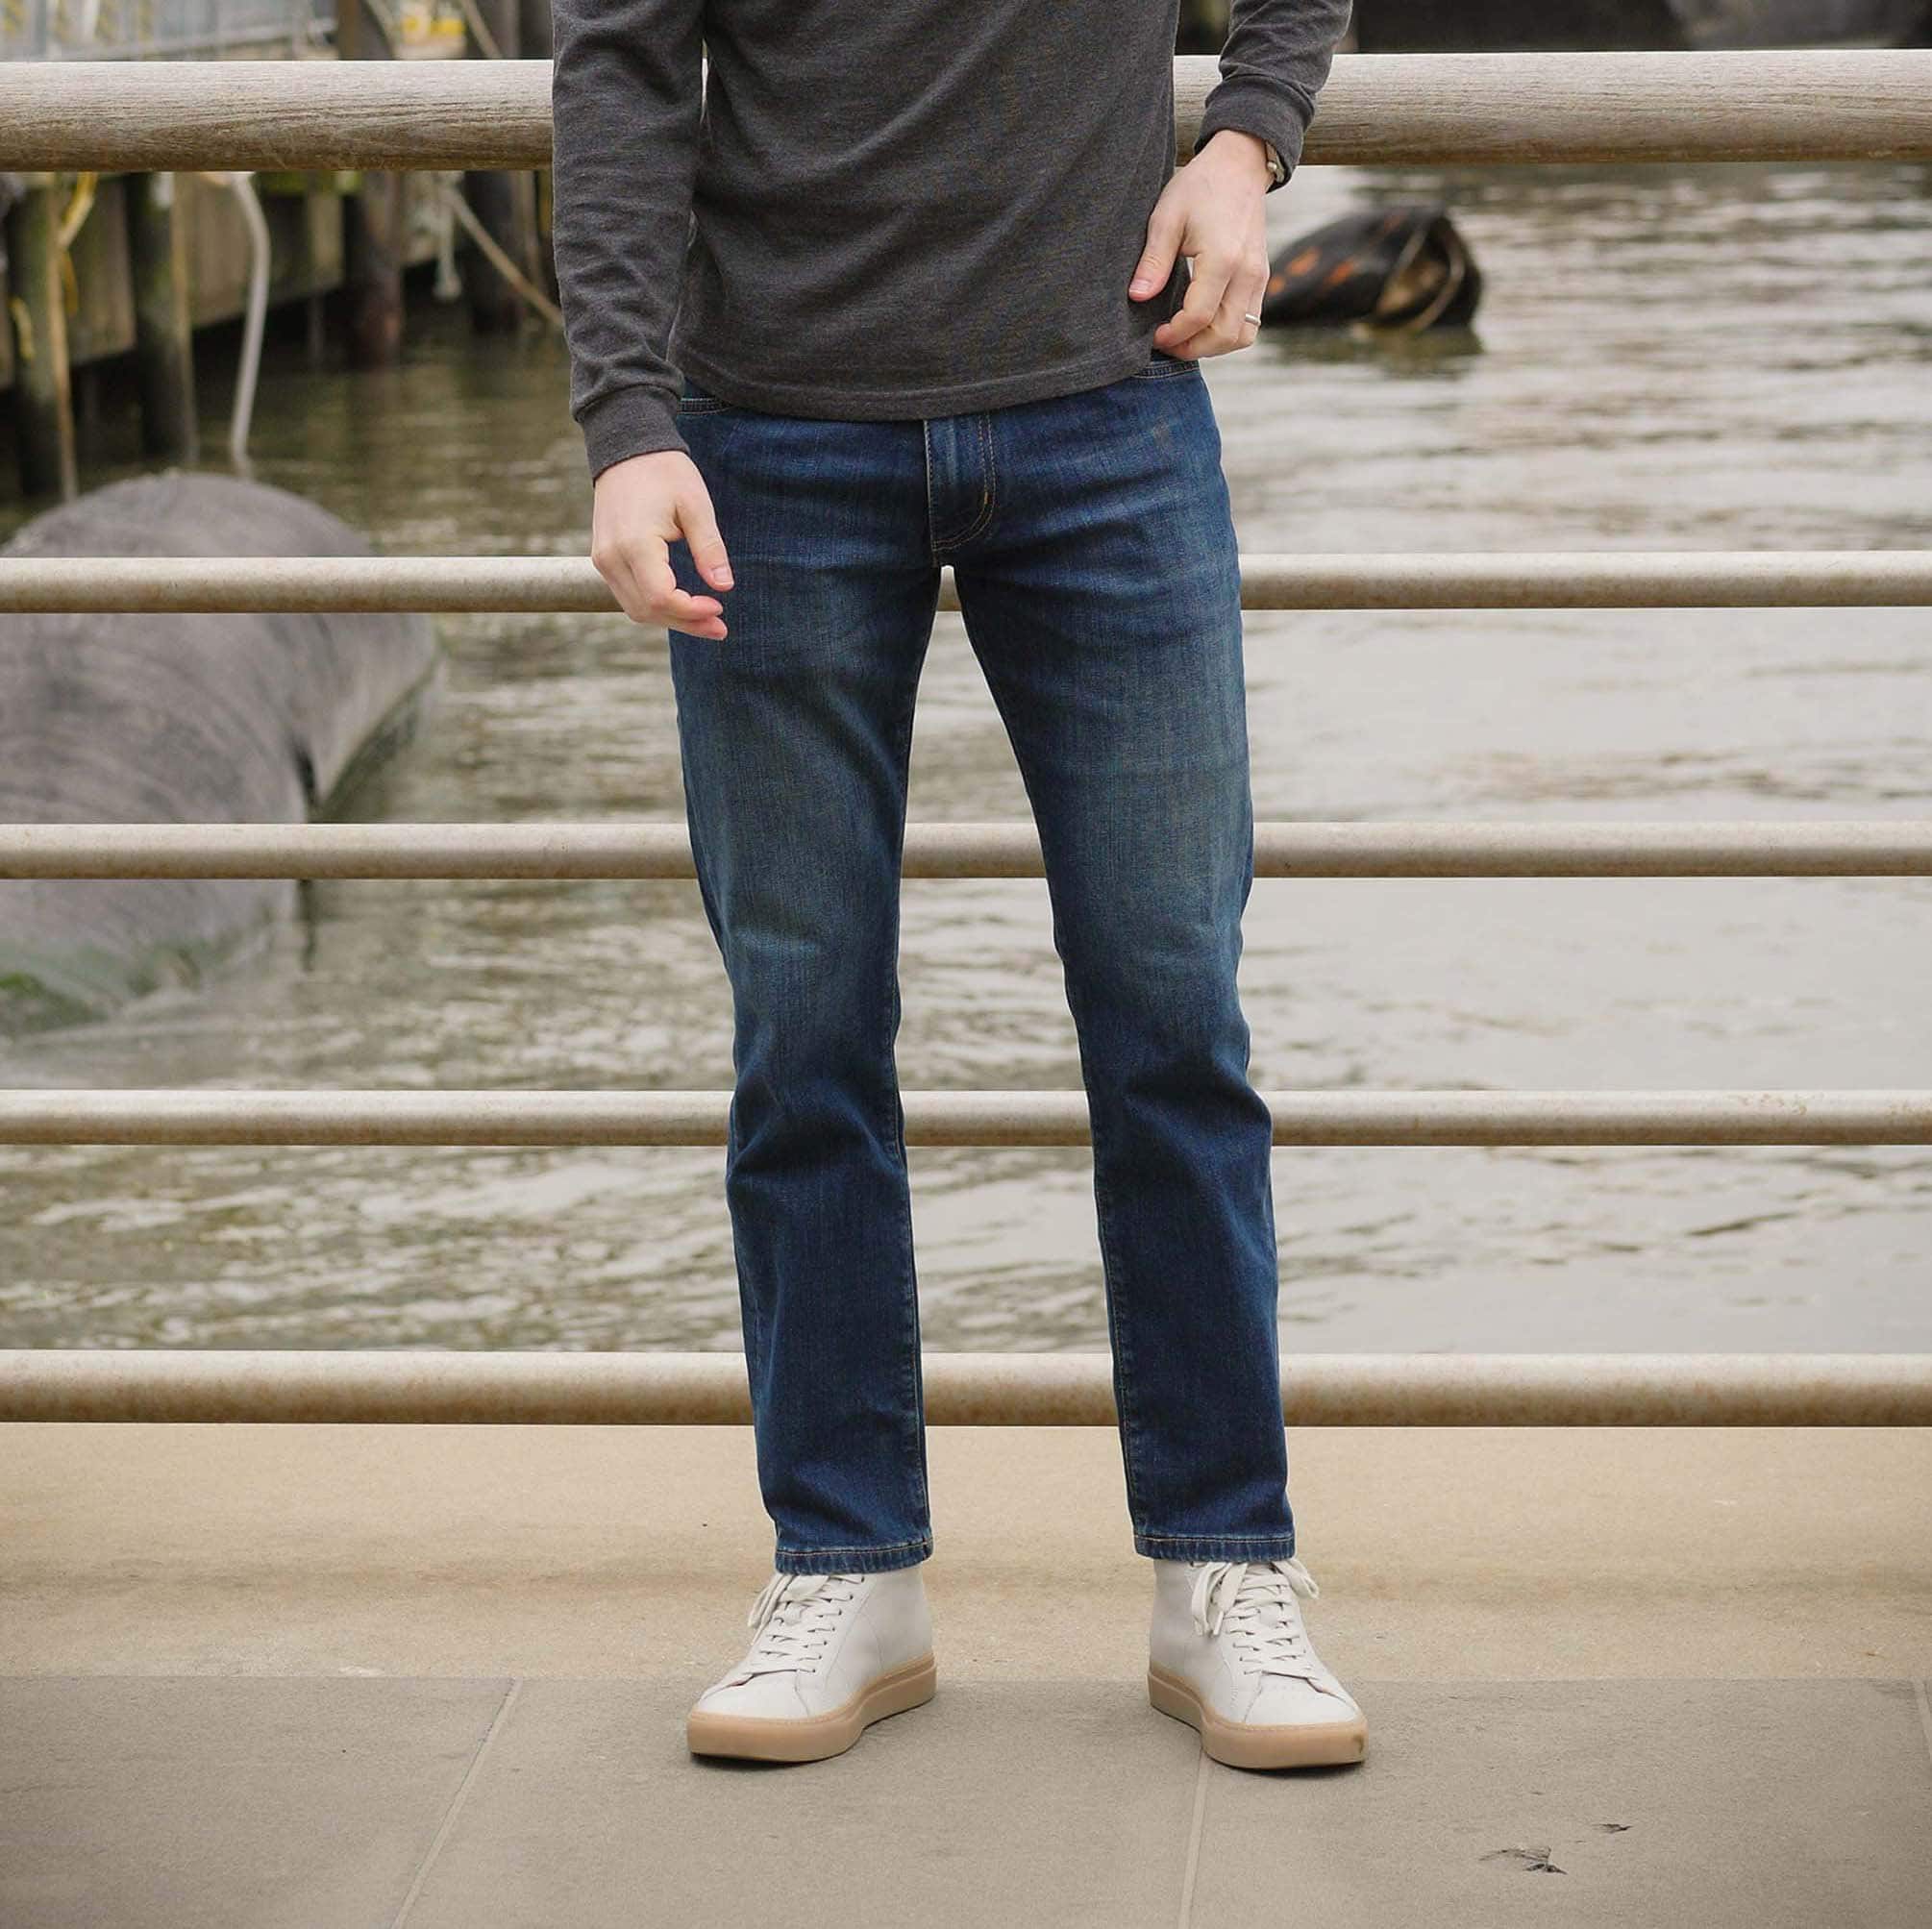 Wrangler Jeans Review: Why I'll Never Need Another Pair of Jeans